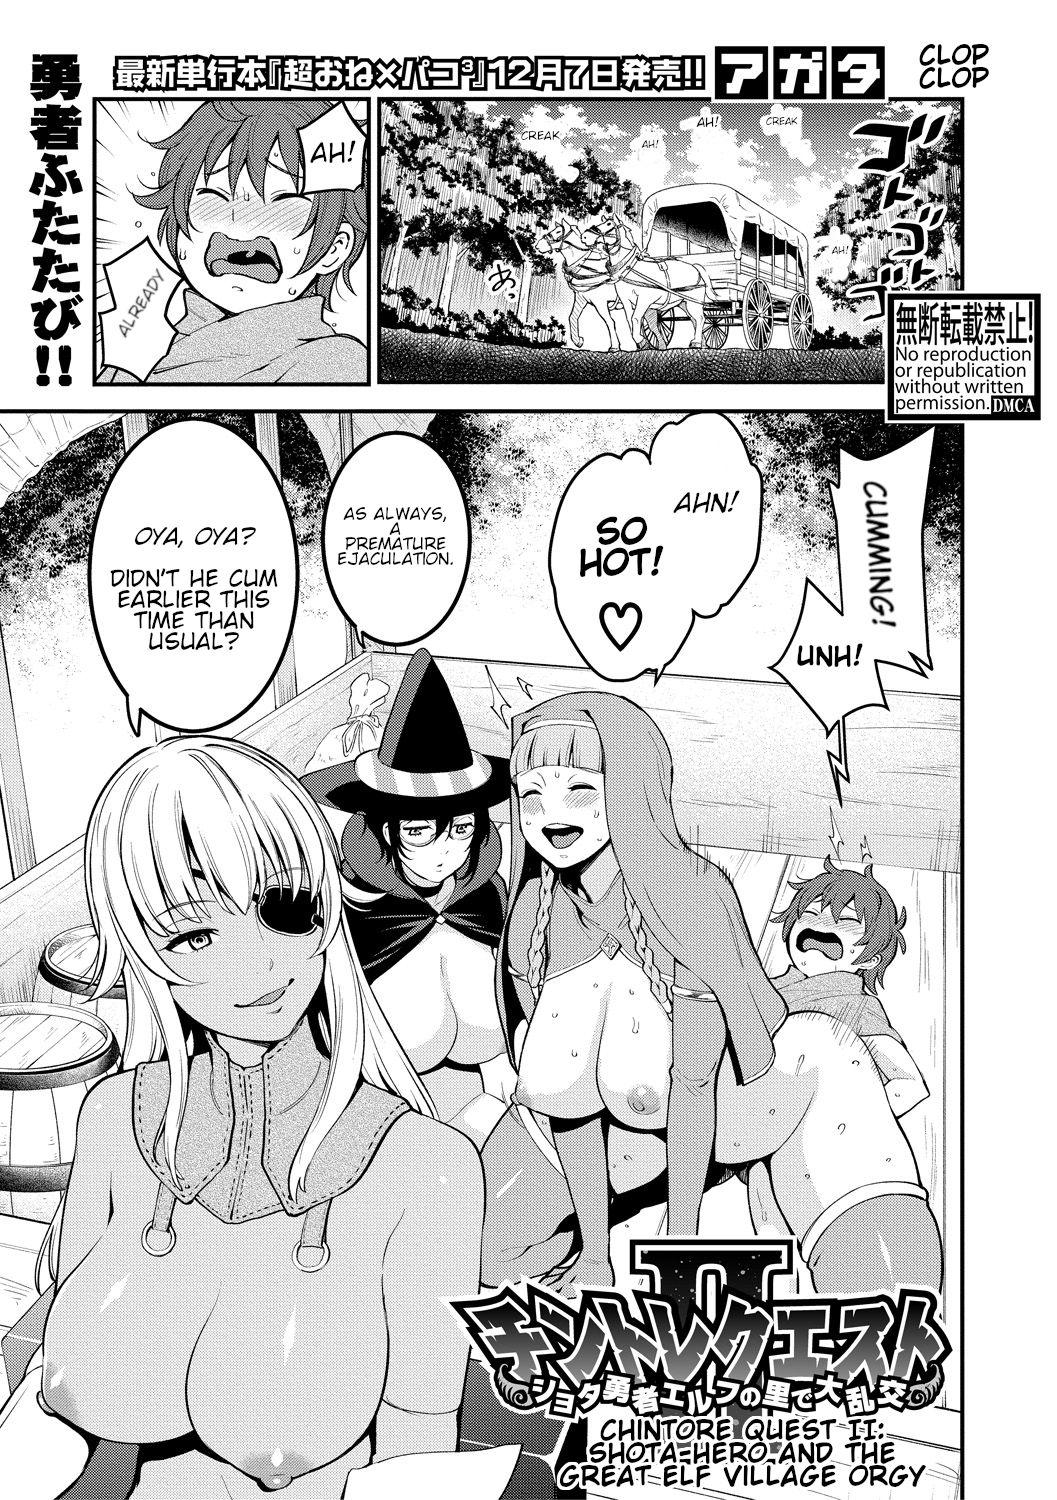 Sloppy Chintore Quest II: Shota Yuusha Elf no Sato de Dai Rankou | Chintore Quest II: Shota Hero and the Great Elf Village Orgy Brazil - Picture 1